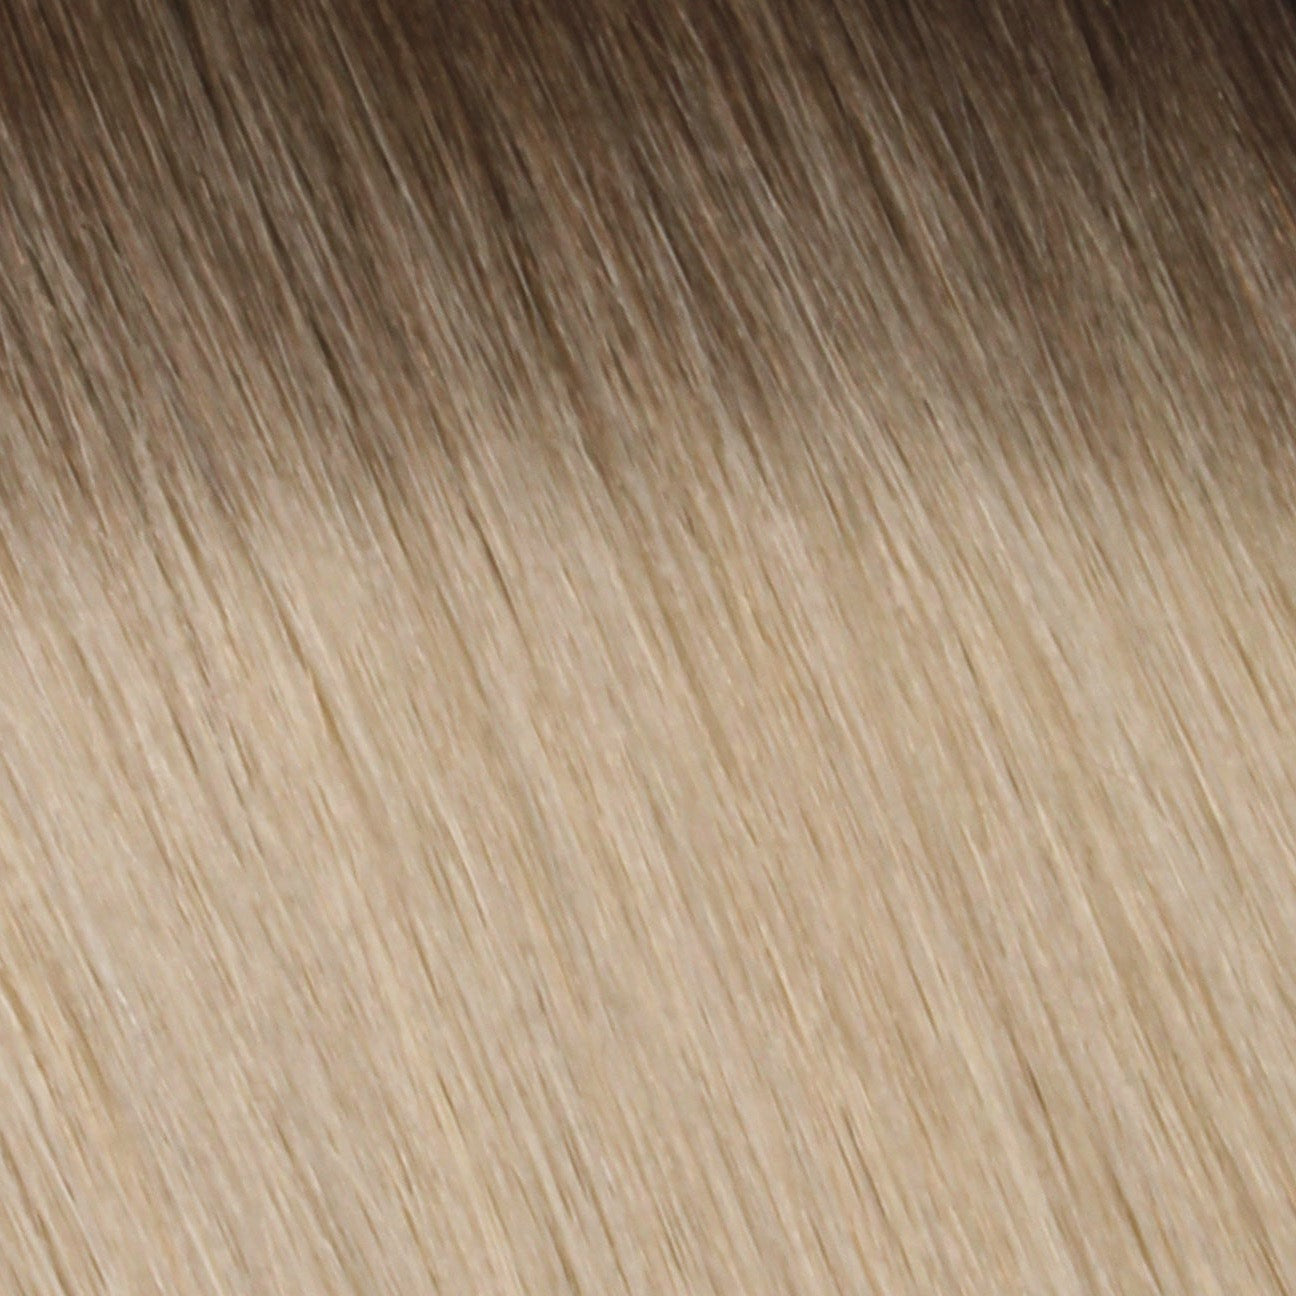 Flat Tip Bonds 18 Inches - SWAY Hair Extensions Rooted-Hollywood-Ash-Blonde-R5-18A-613A SWAY Flat Tip Bonds, 18&quot;- 100% Remy Human Hair Extensions with Italian Keratin. Perfect for hair goals.